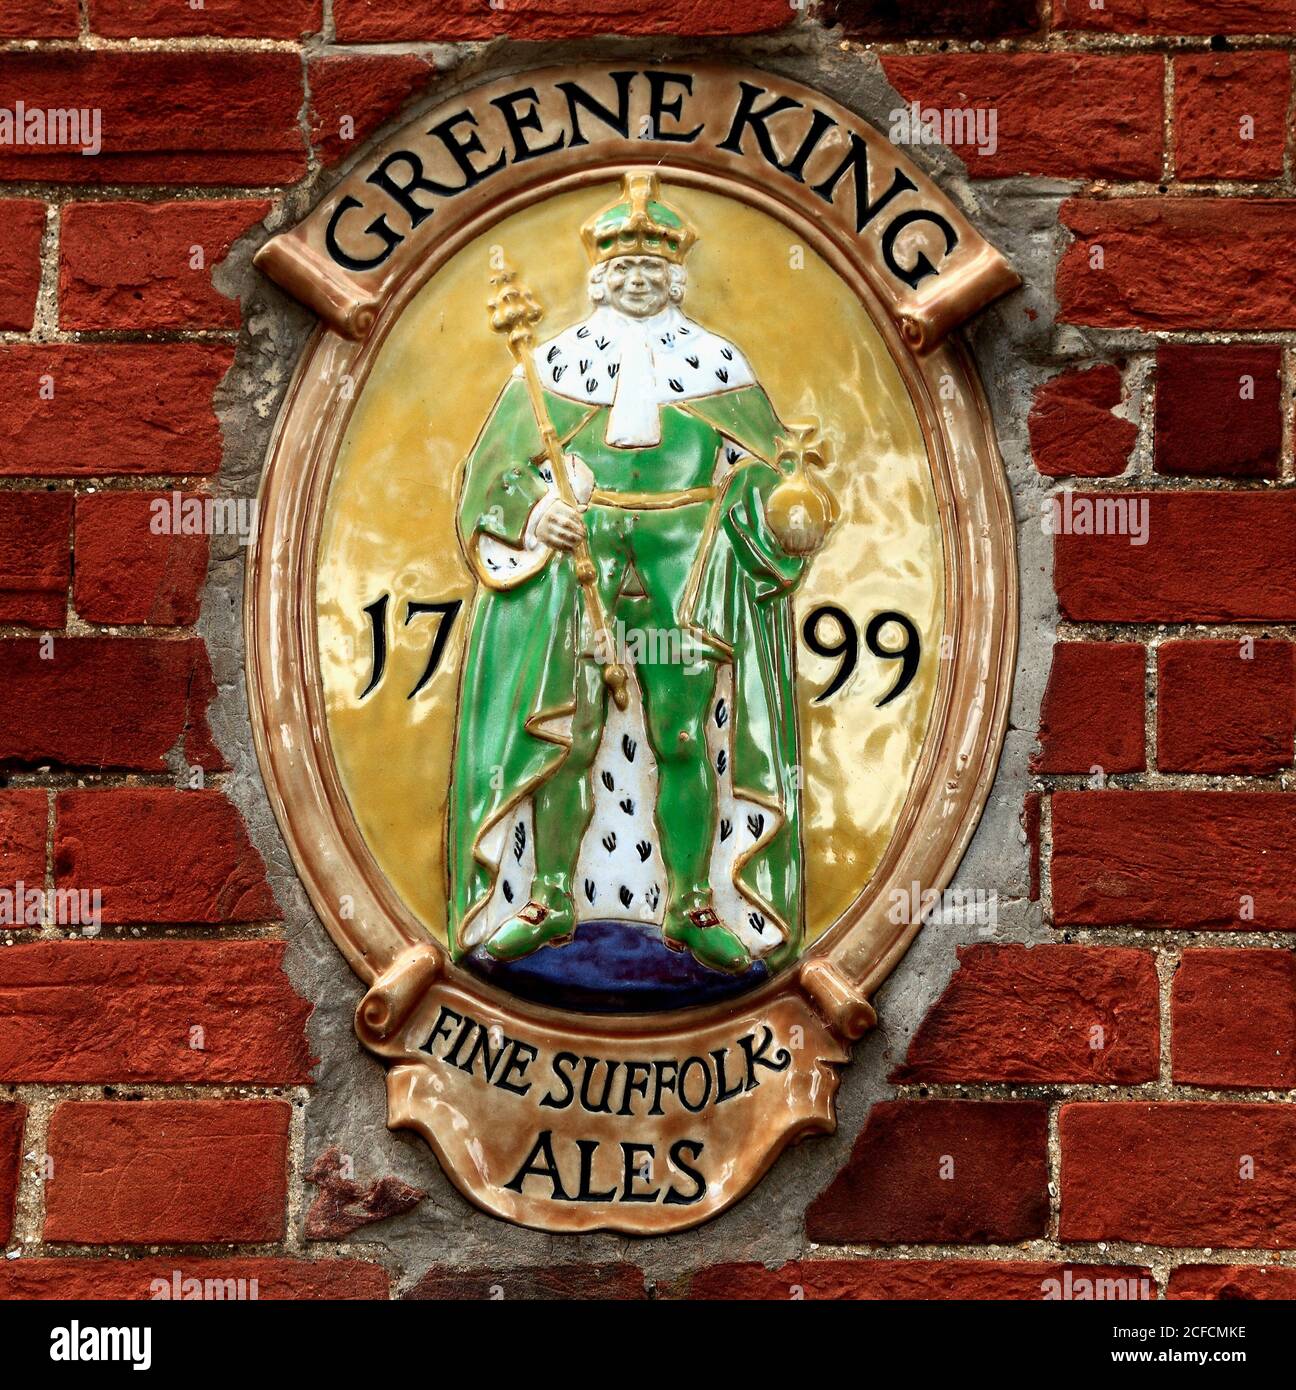 Greene King, of Bury St. Edmunds, Brewery,plaque, pub wall,beers, fine Suffolk ales Stock Photo